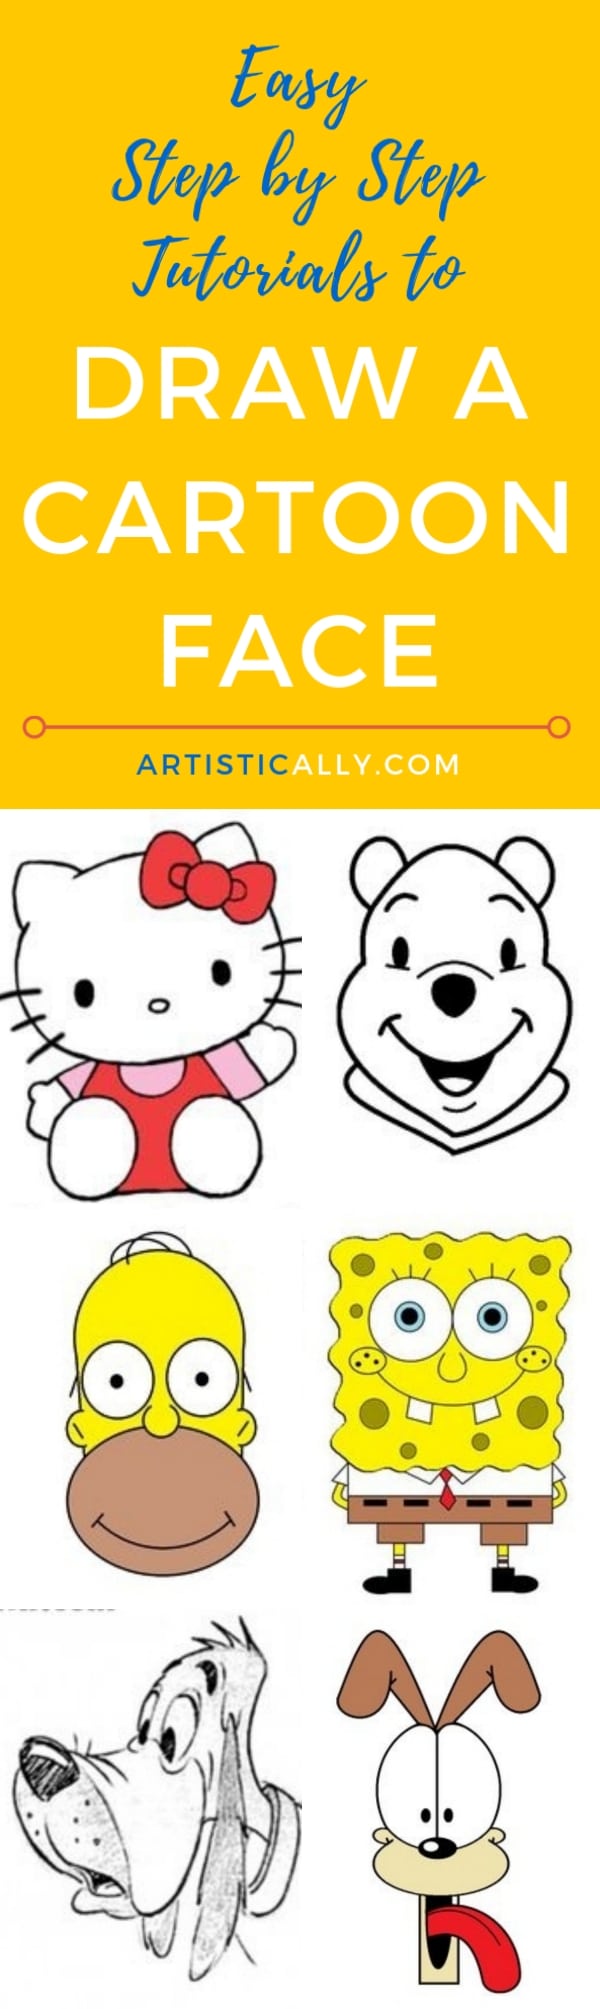 40 Easy Step by Step Tutorials to Draw a Cartoon Face Artisticaly